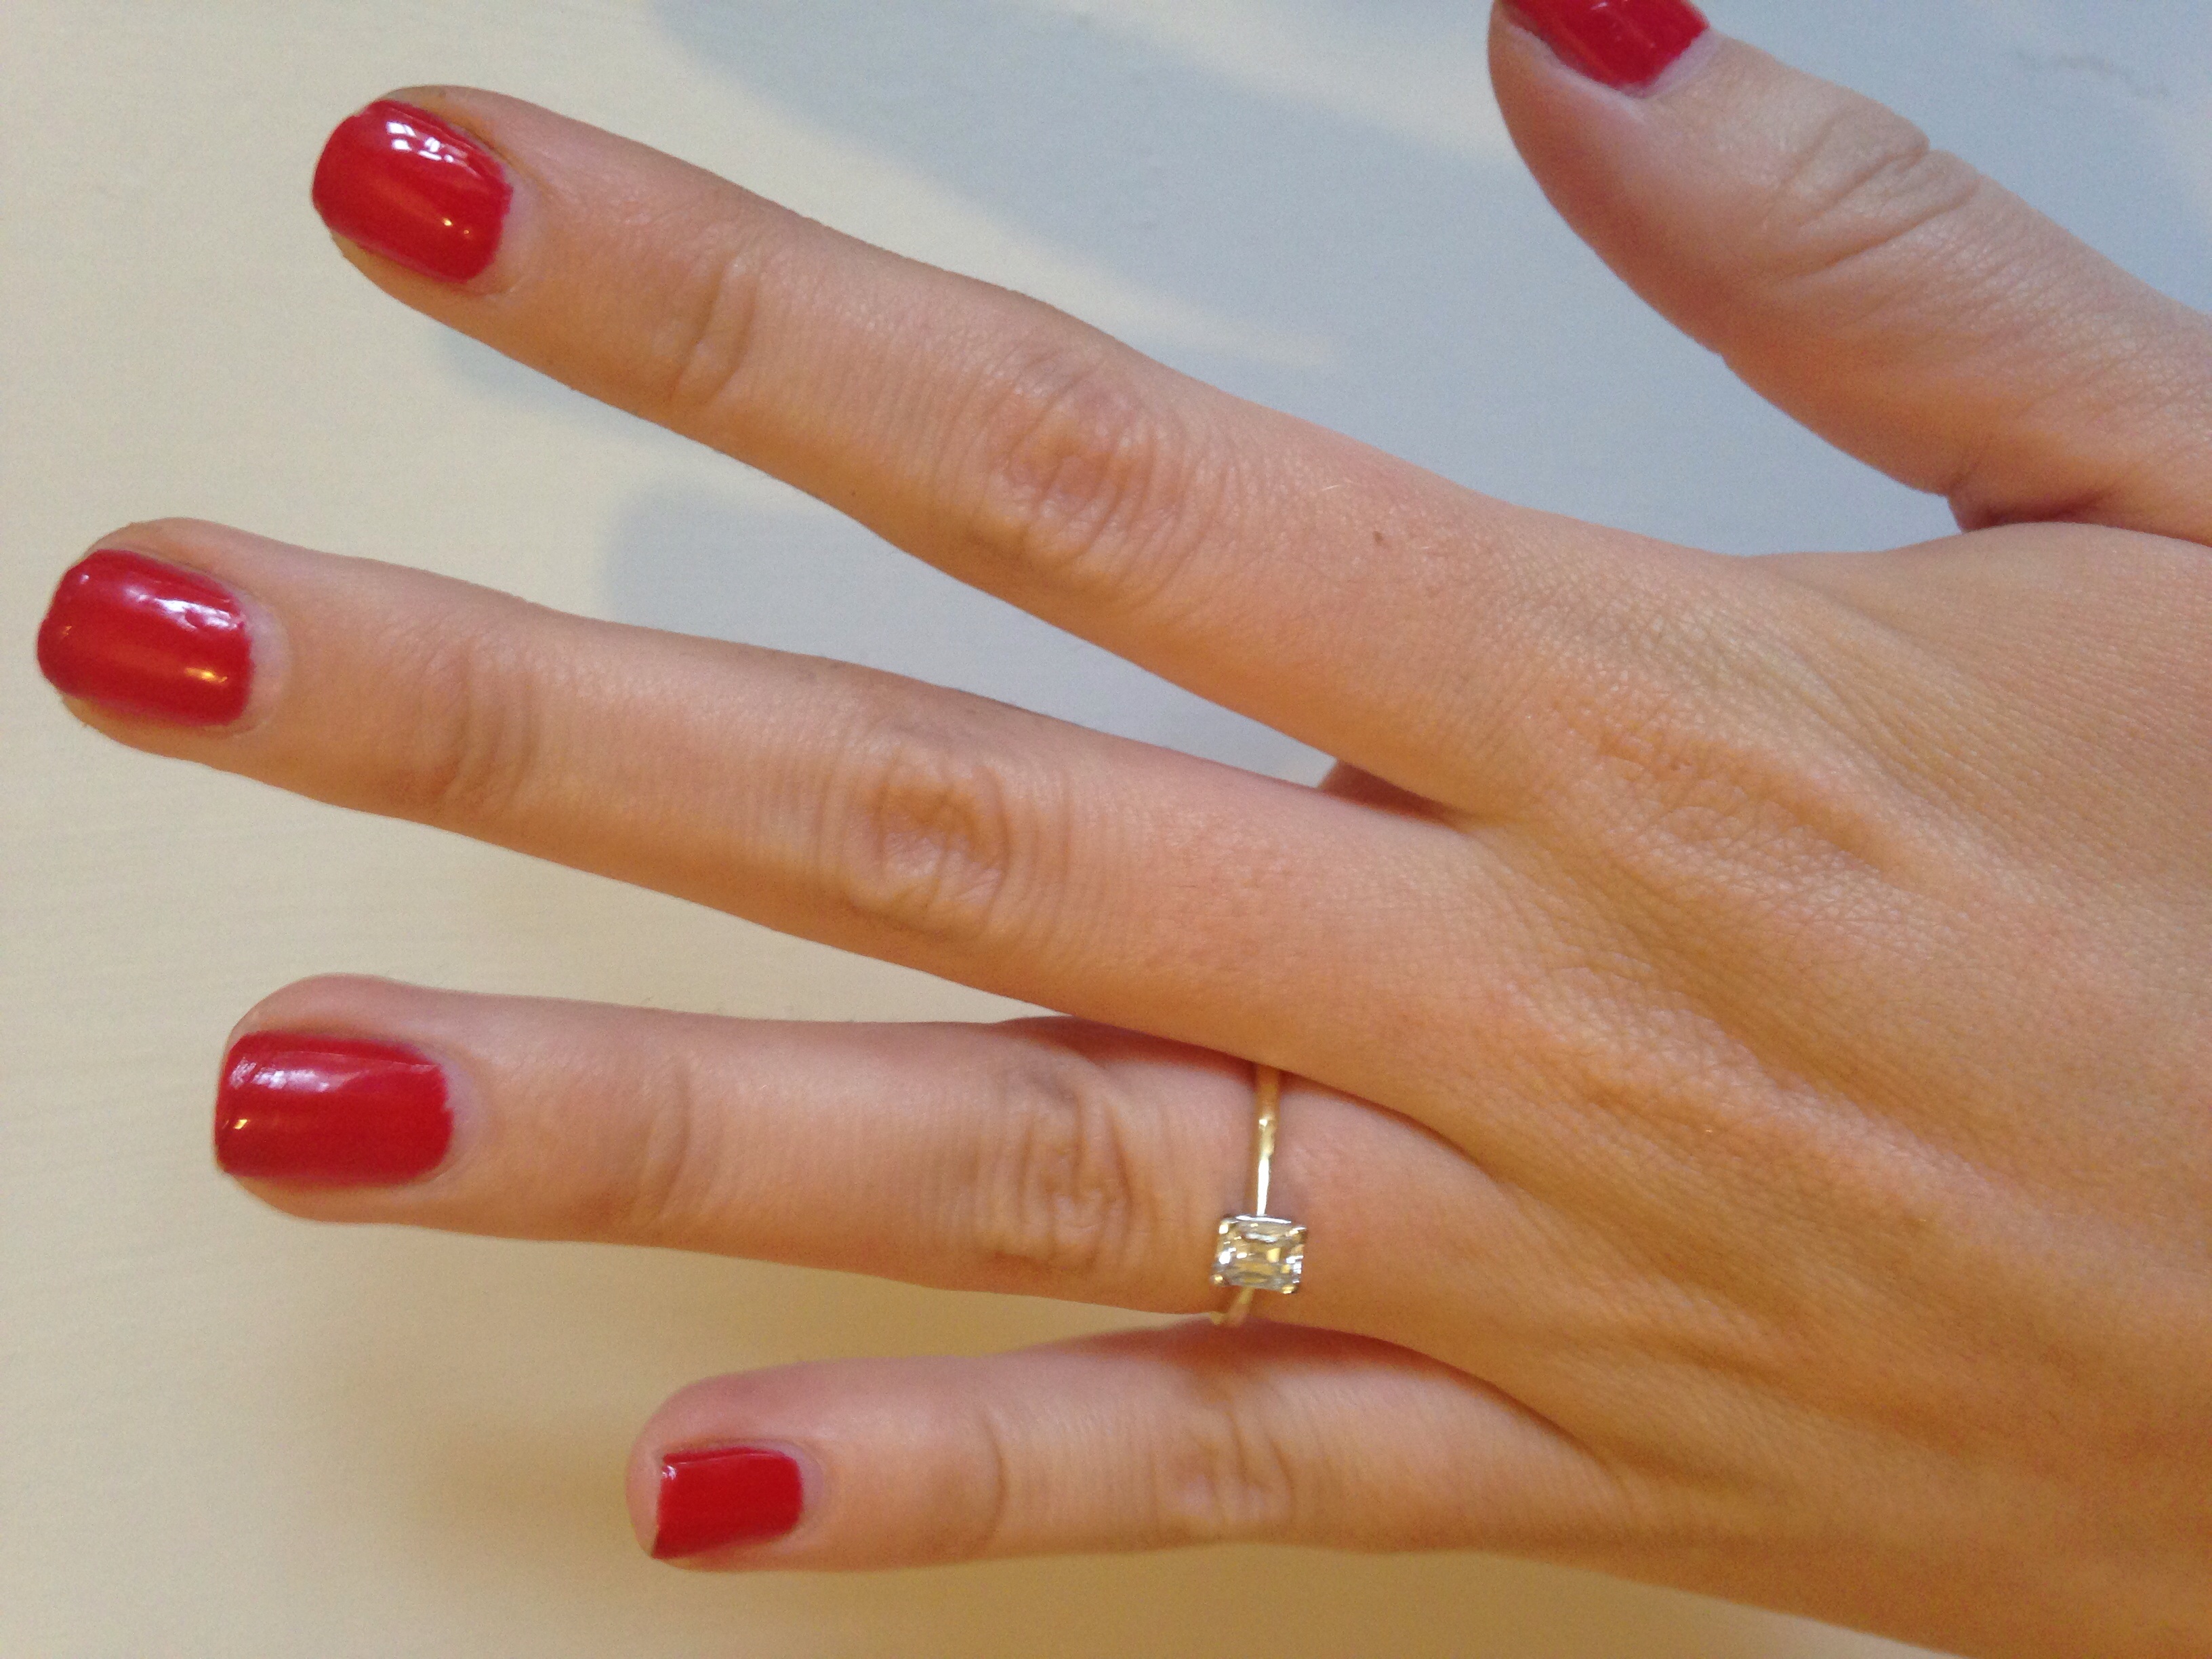 What nail polish colours suit yellow gold rings the best?